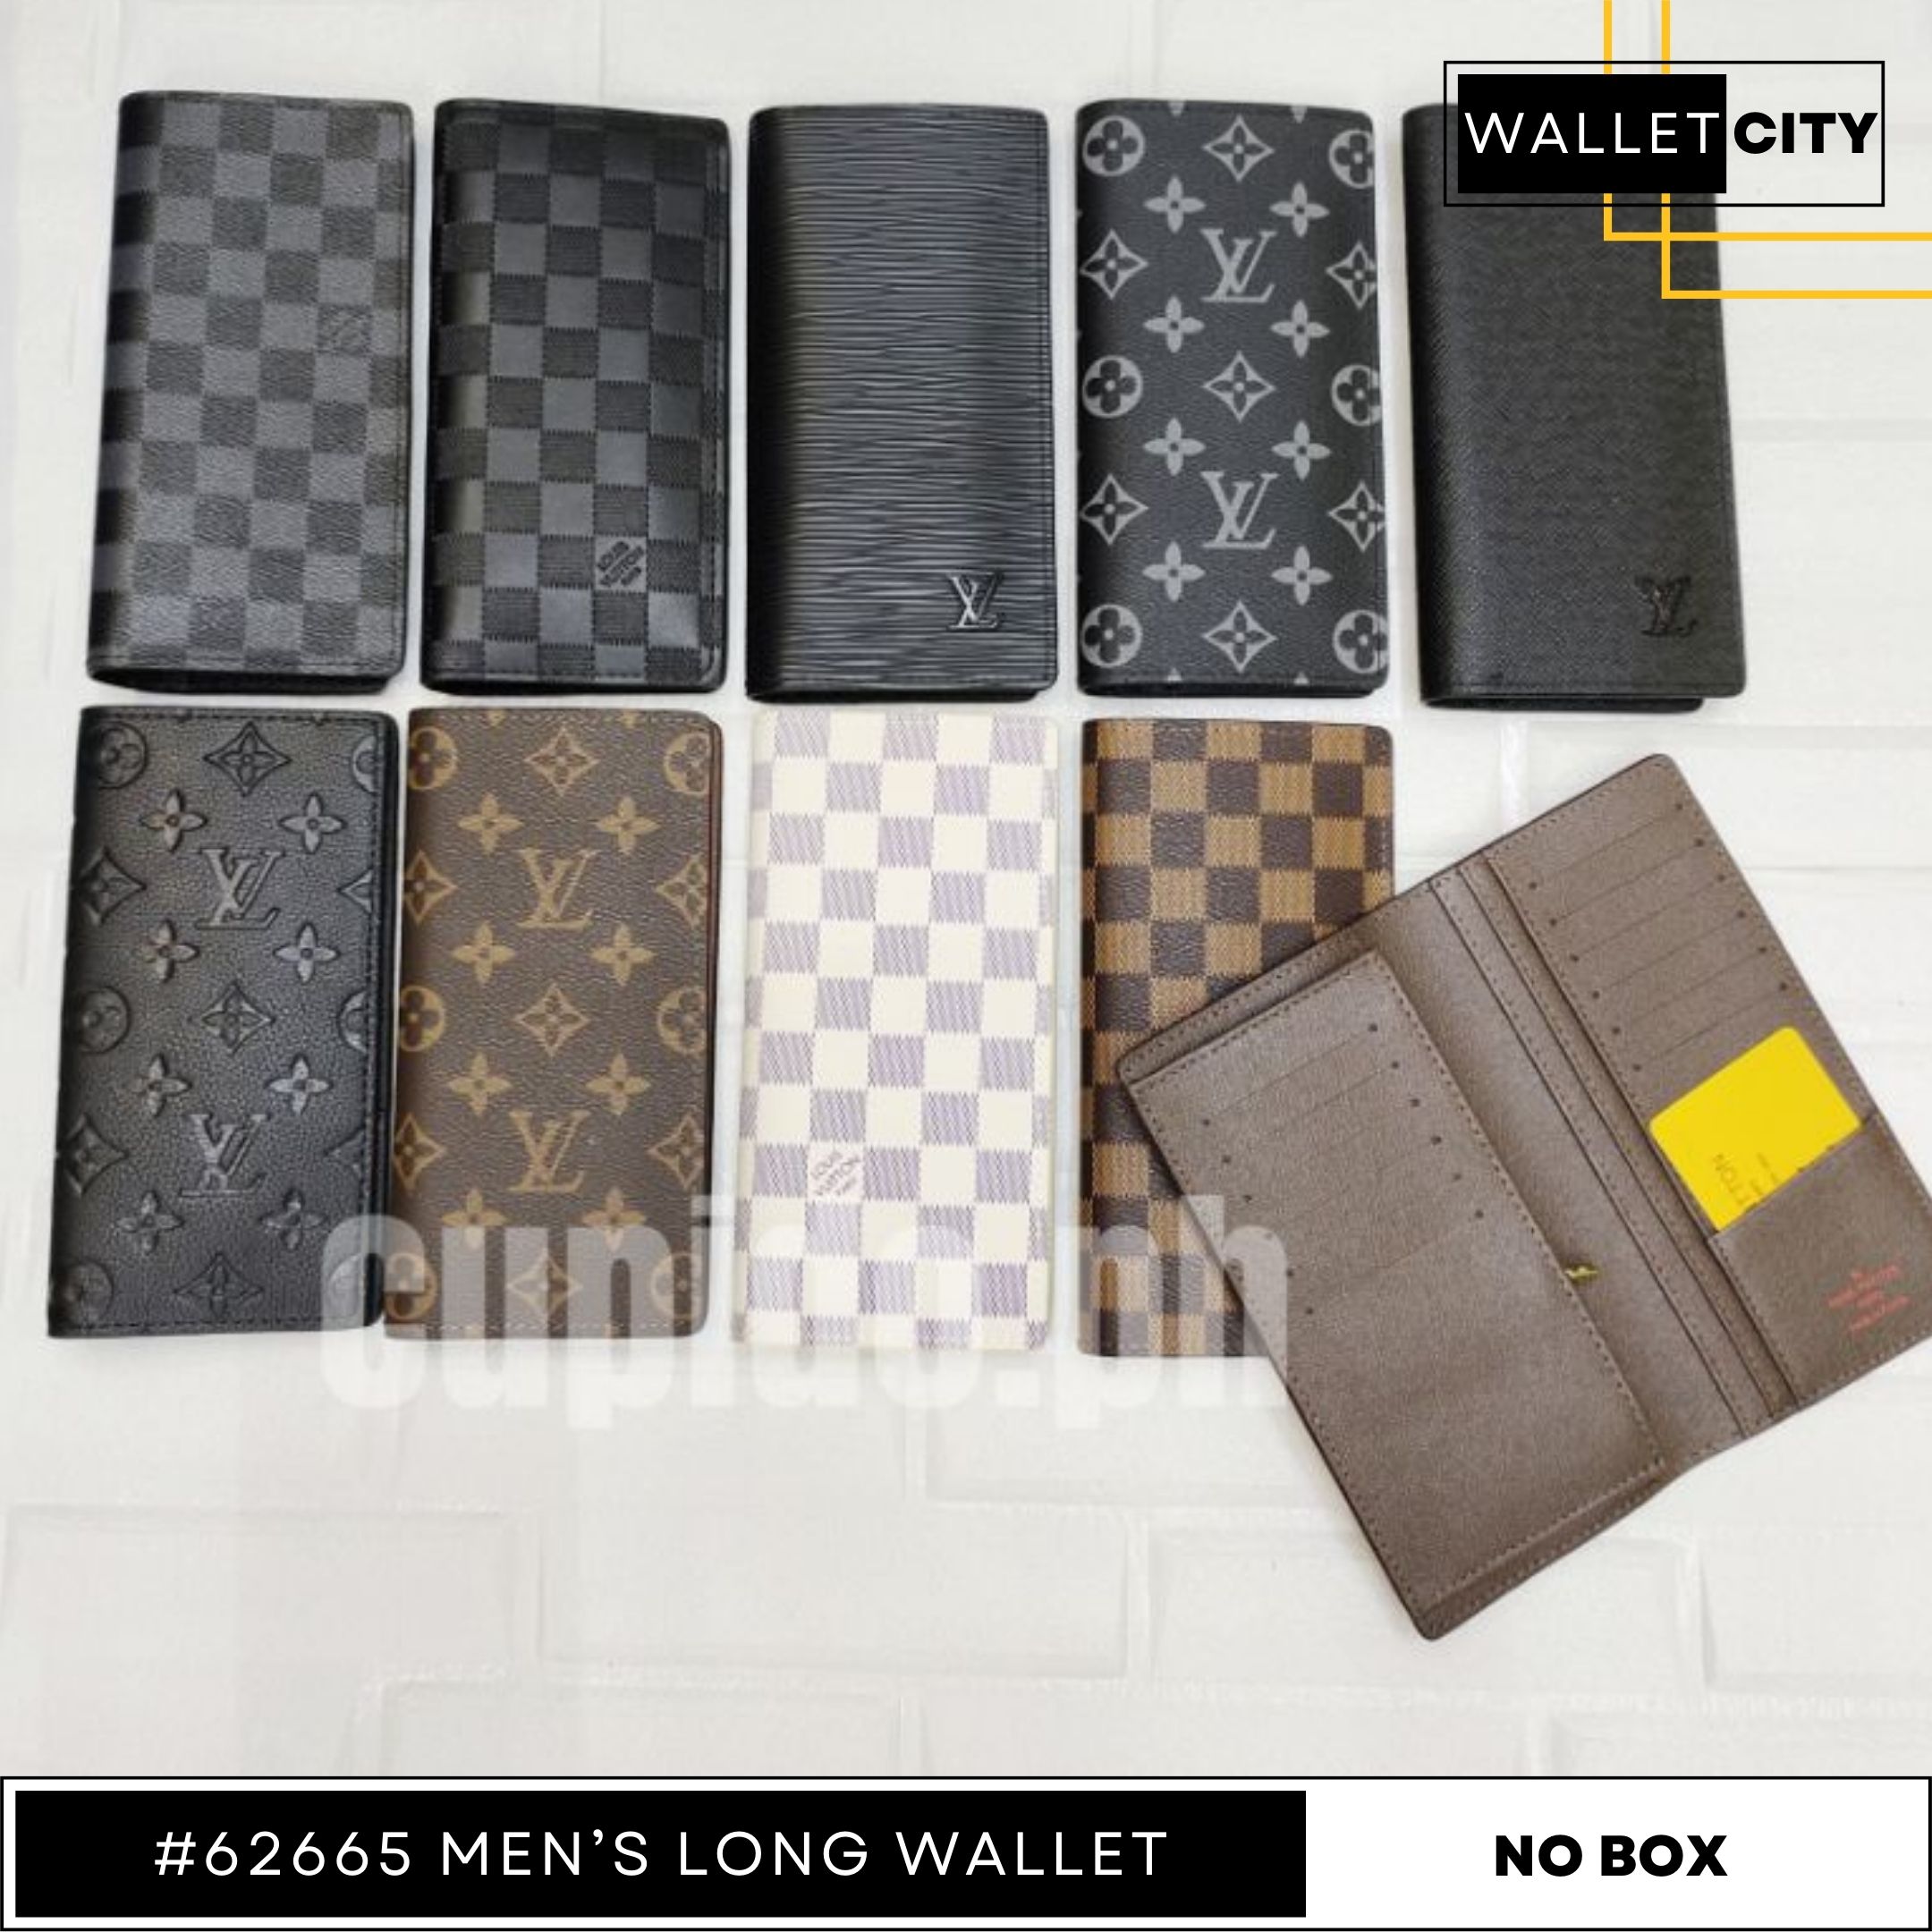 Walletcity Simple Men's Wallet Bifold Leather Wallet With Picture Slot  (With Box) #60223